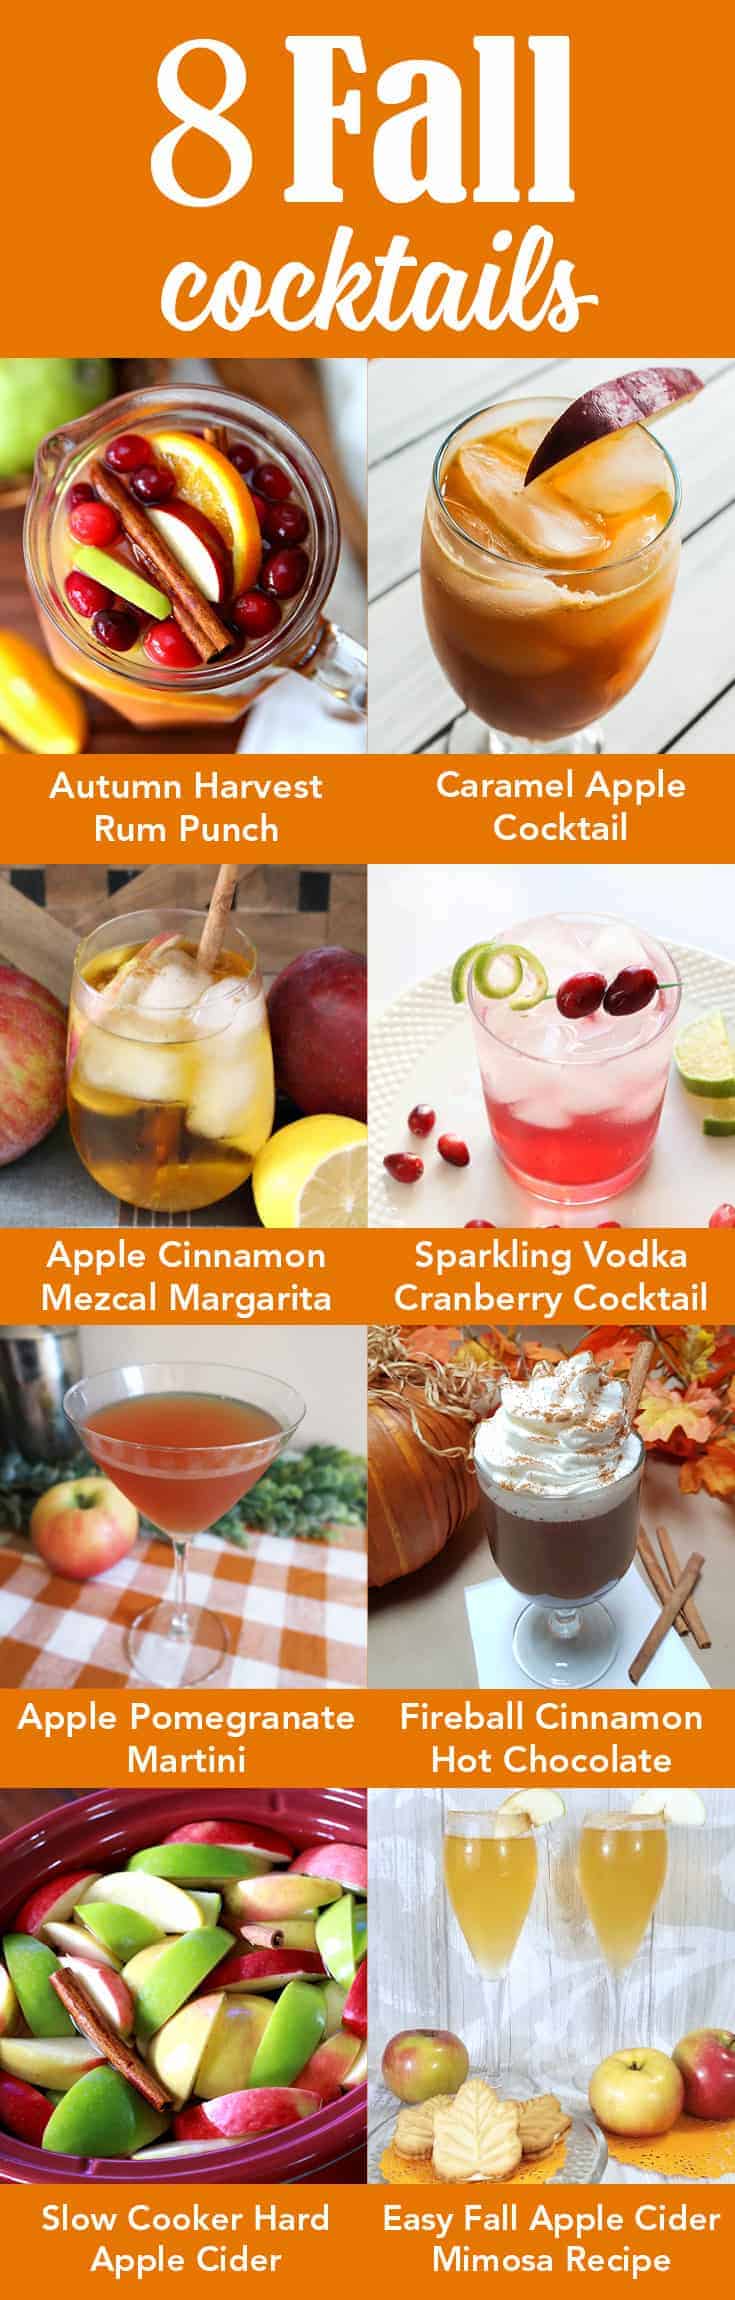 Easy Fall Apple Cider Mimosa Recipe Michelle James Designs,Gas Grills On Clearance